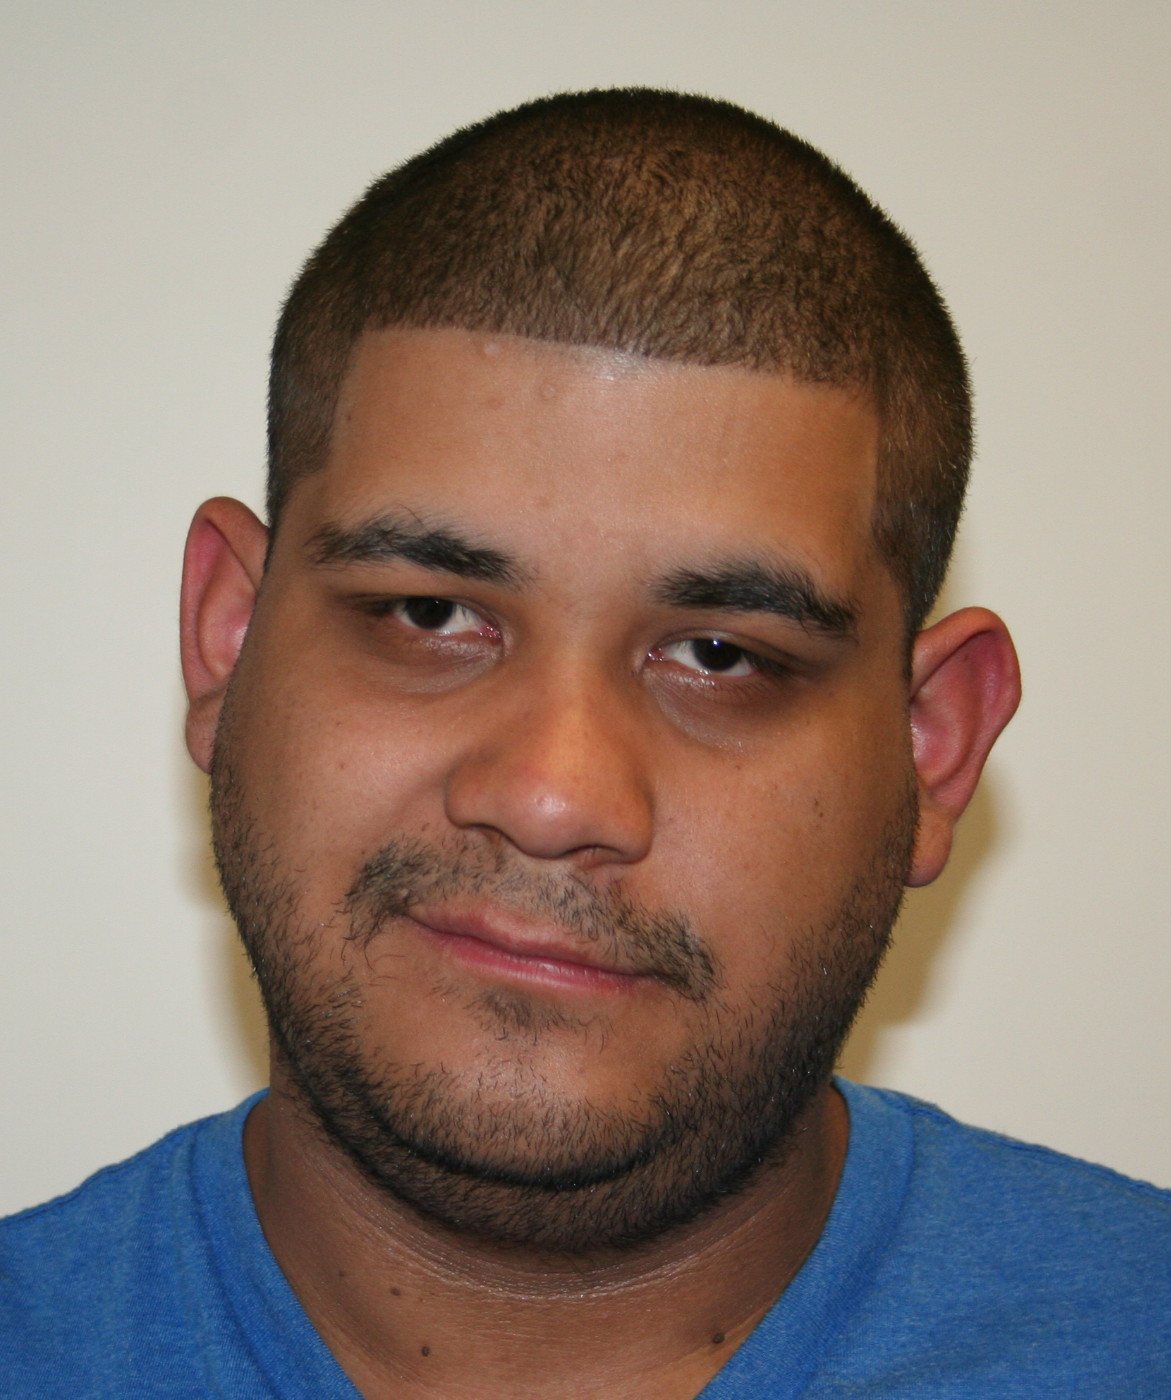 Samuel Bernstein, 24, of Roslyn, was charged with grand larceny for allegedly stealing more than $4.5 million from his mother's bank account. (Photo courtesy of Nassau County District Attorney)